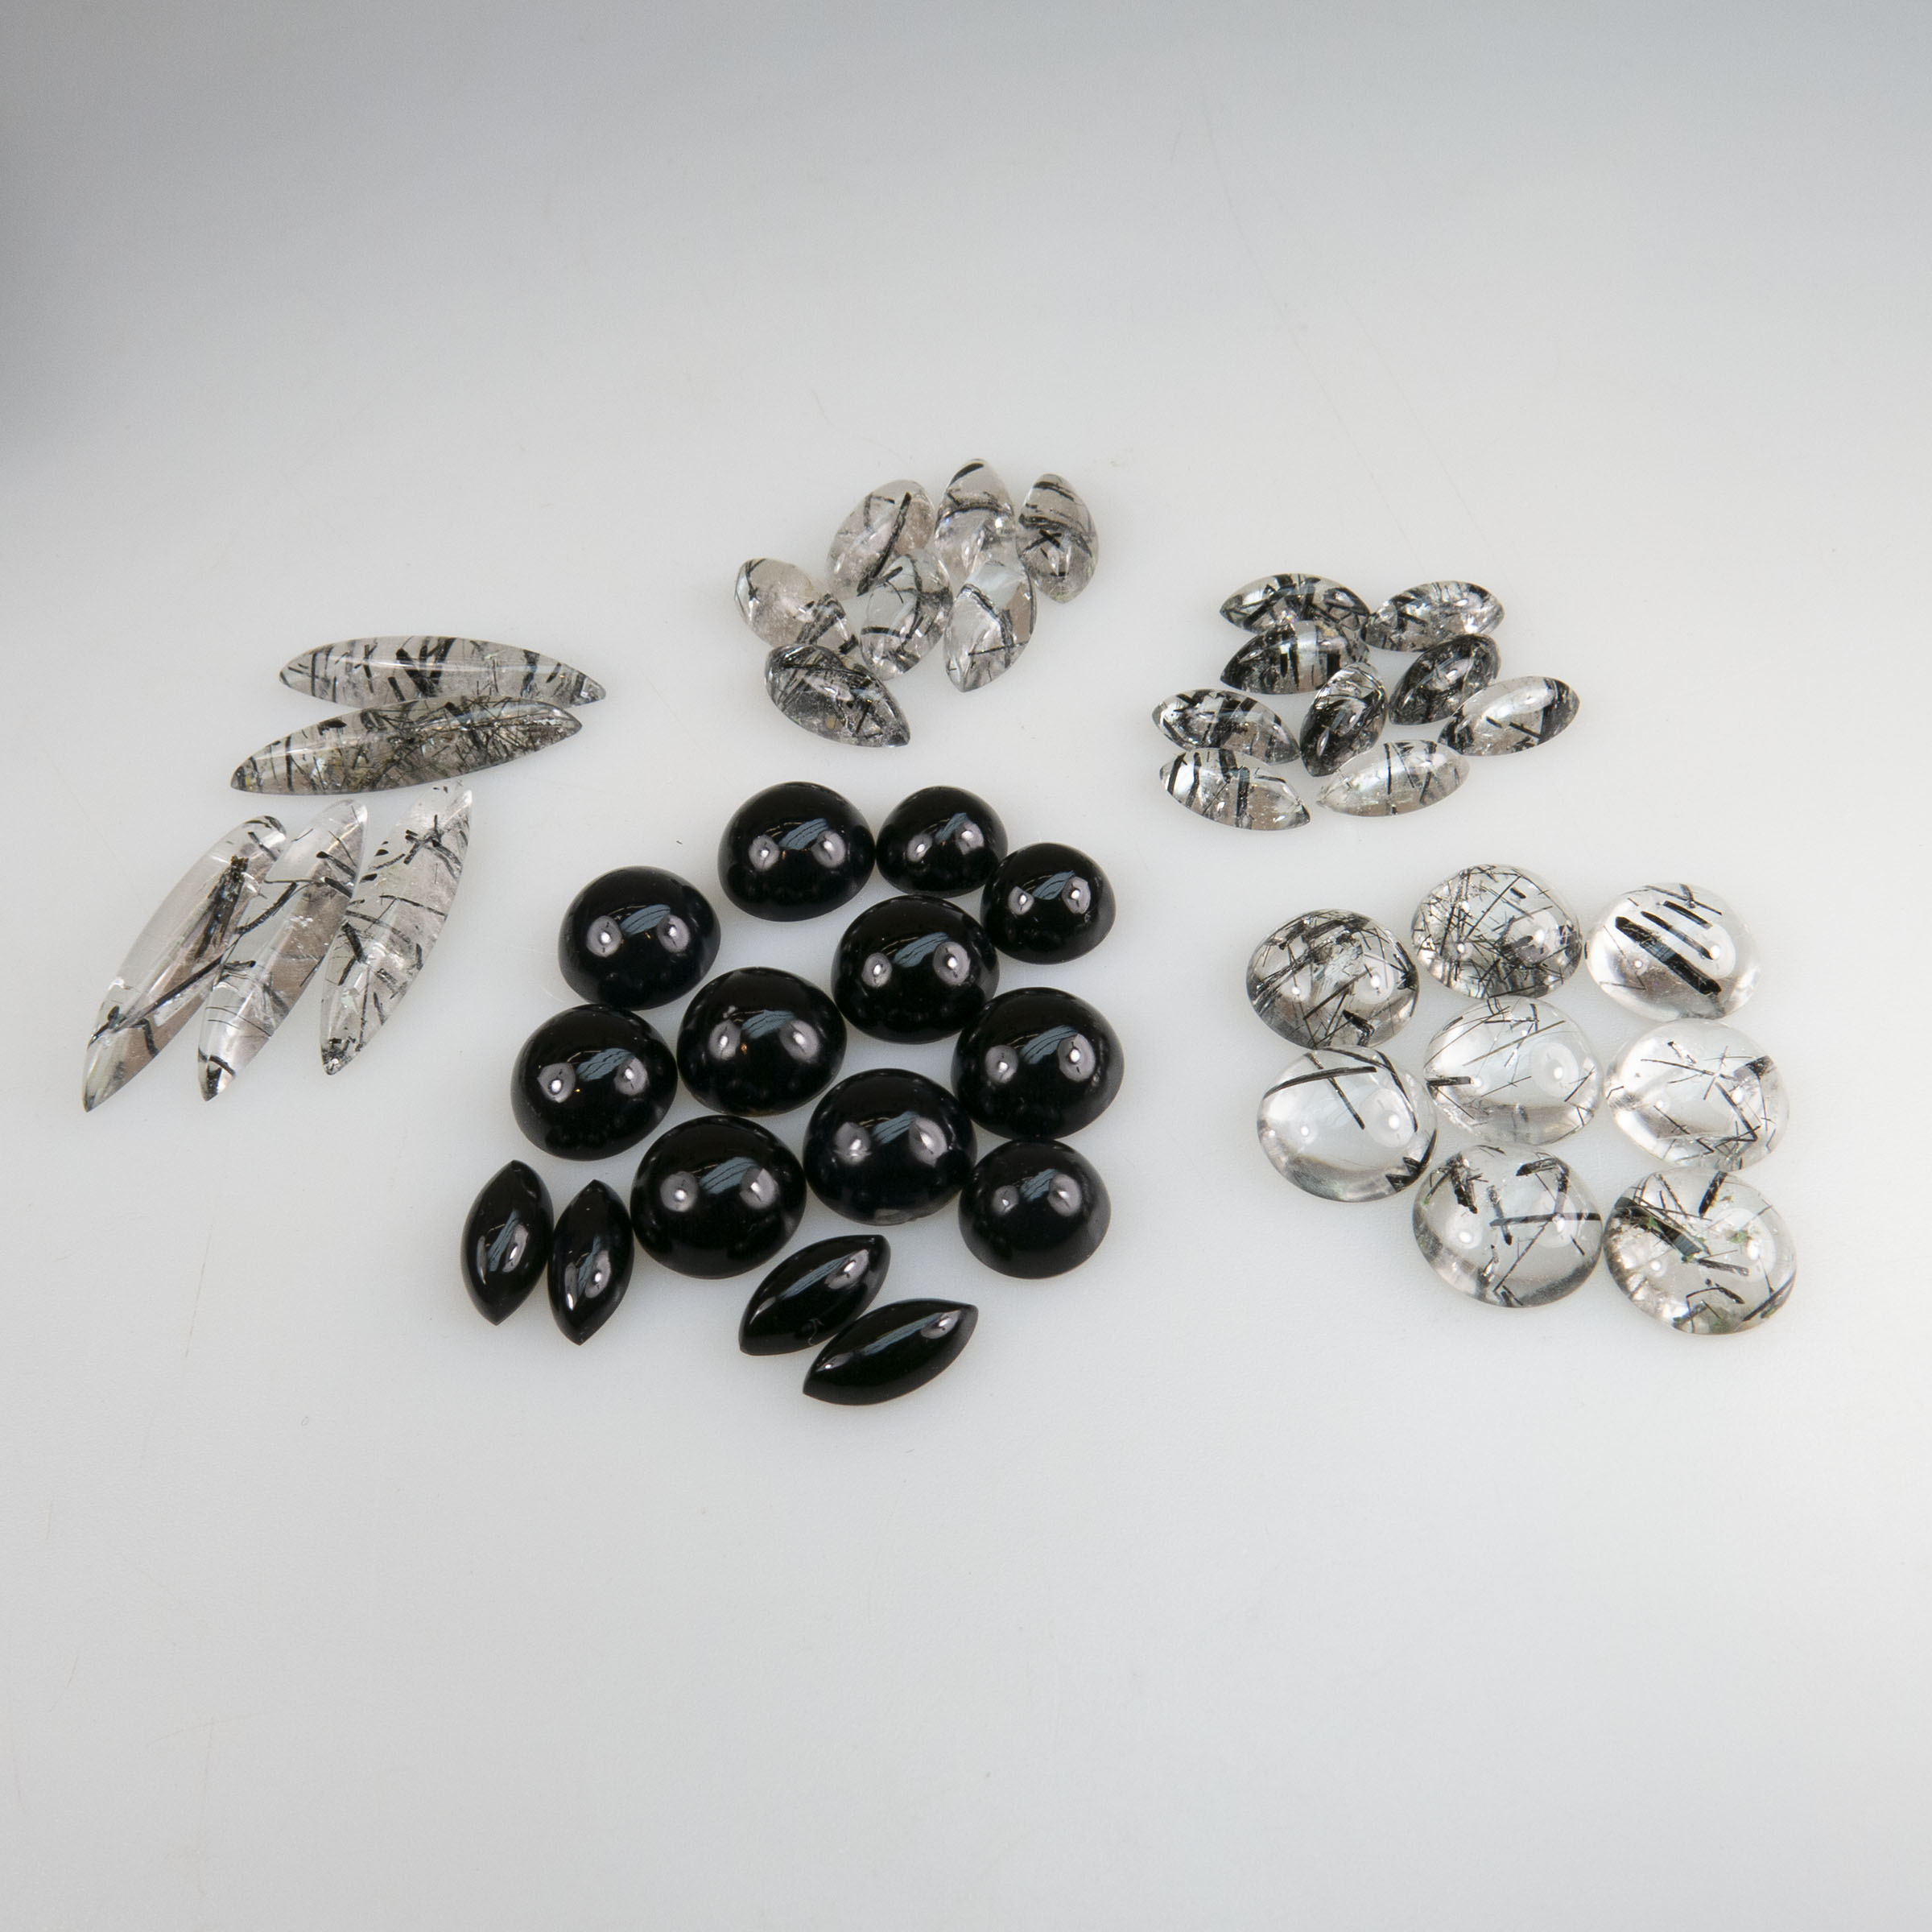 A Collection Of Onyx And Tourmalinated Quartz Cabochons